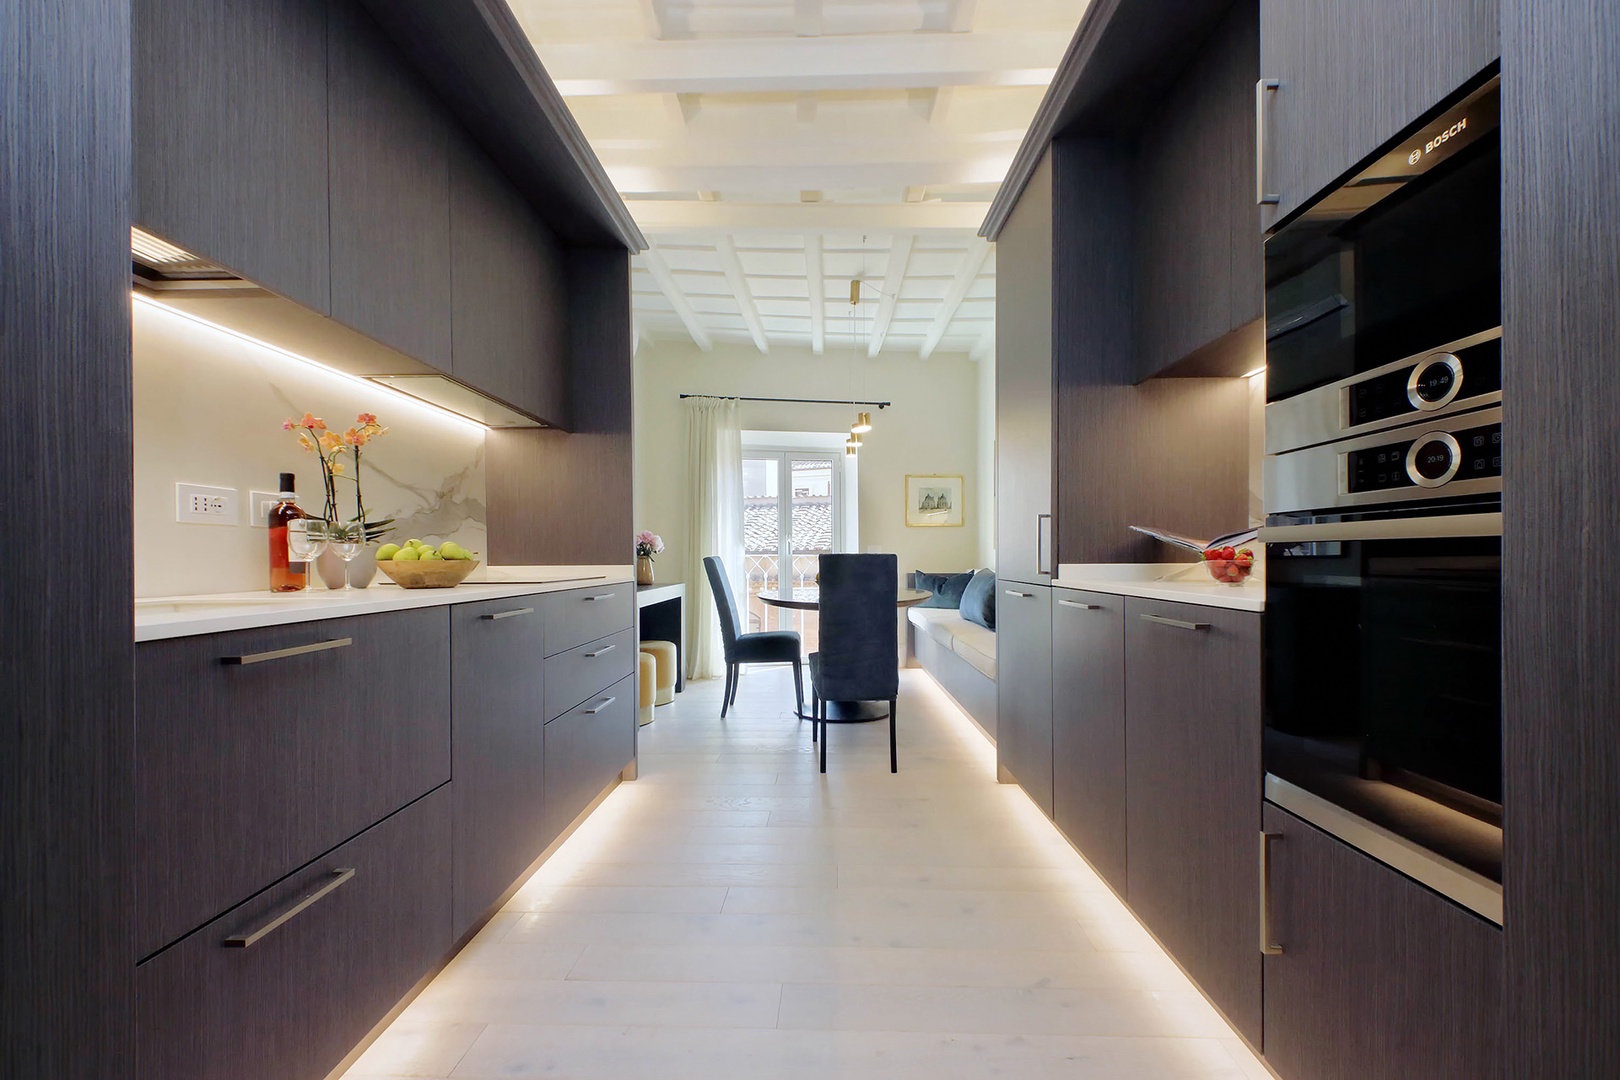 Fully equipped kitchen has a sleek and modern design.